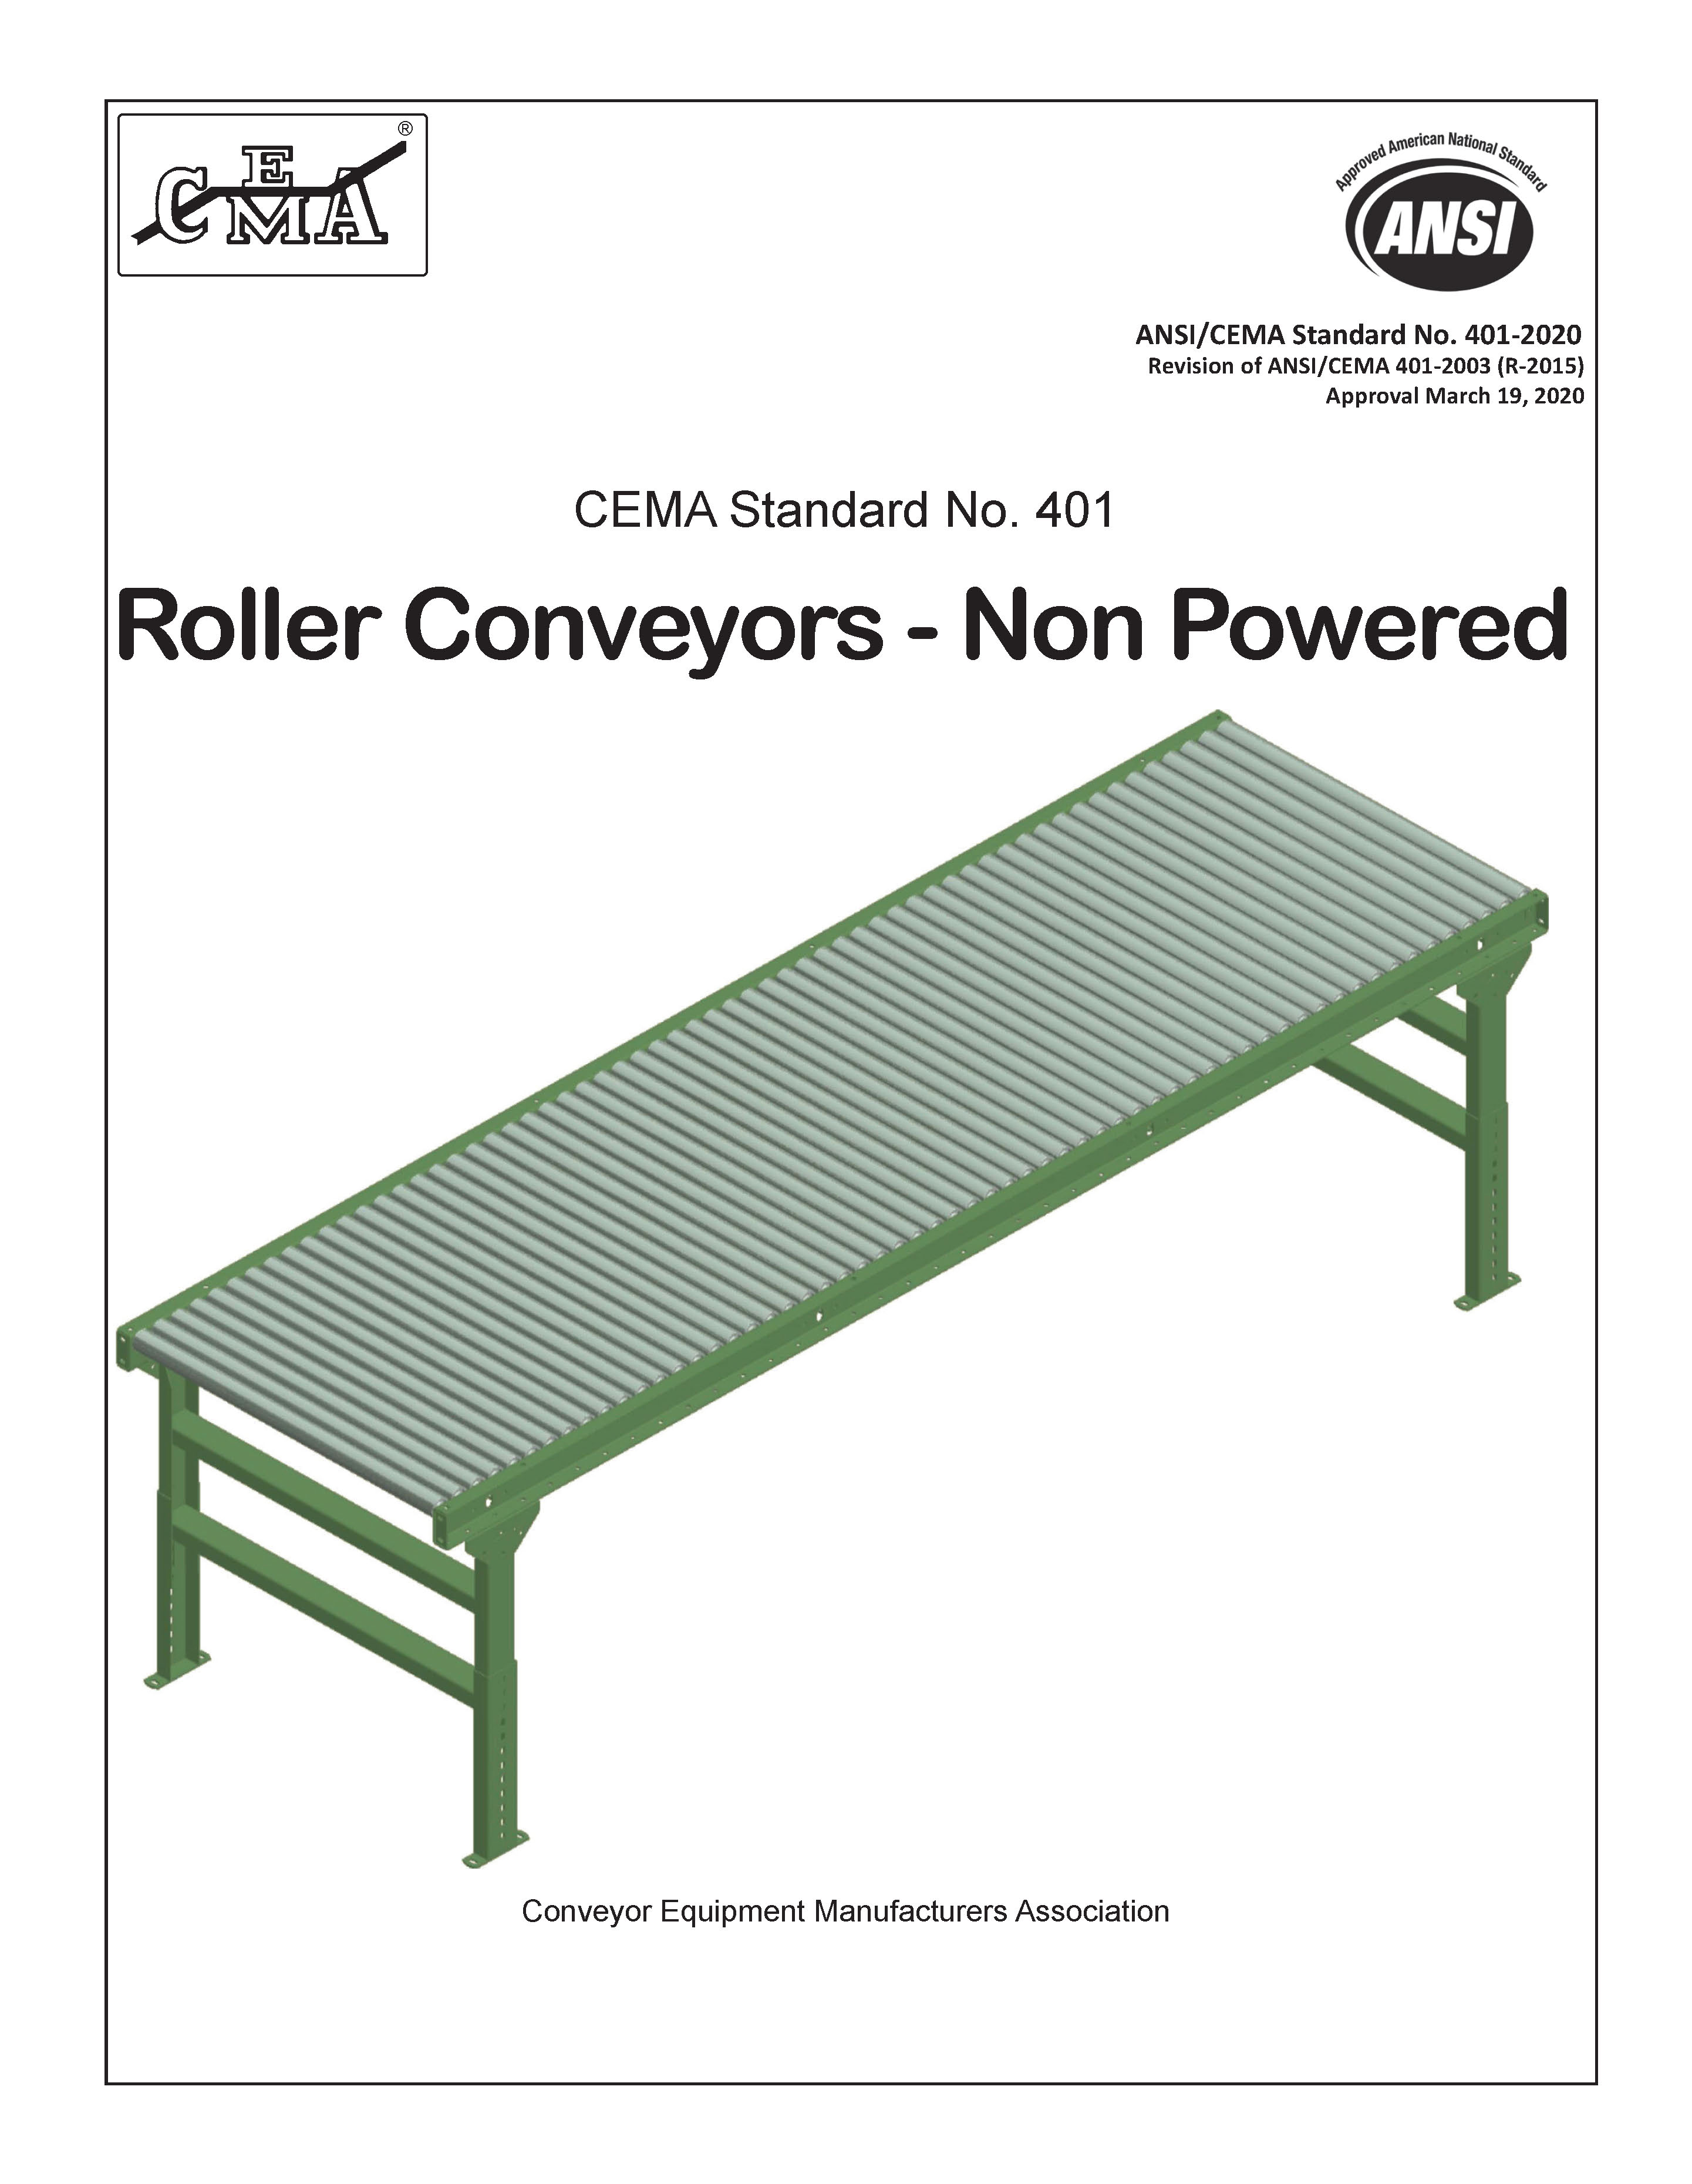 mechanical conveyors selection and operation pdf to excel